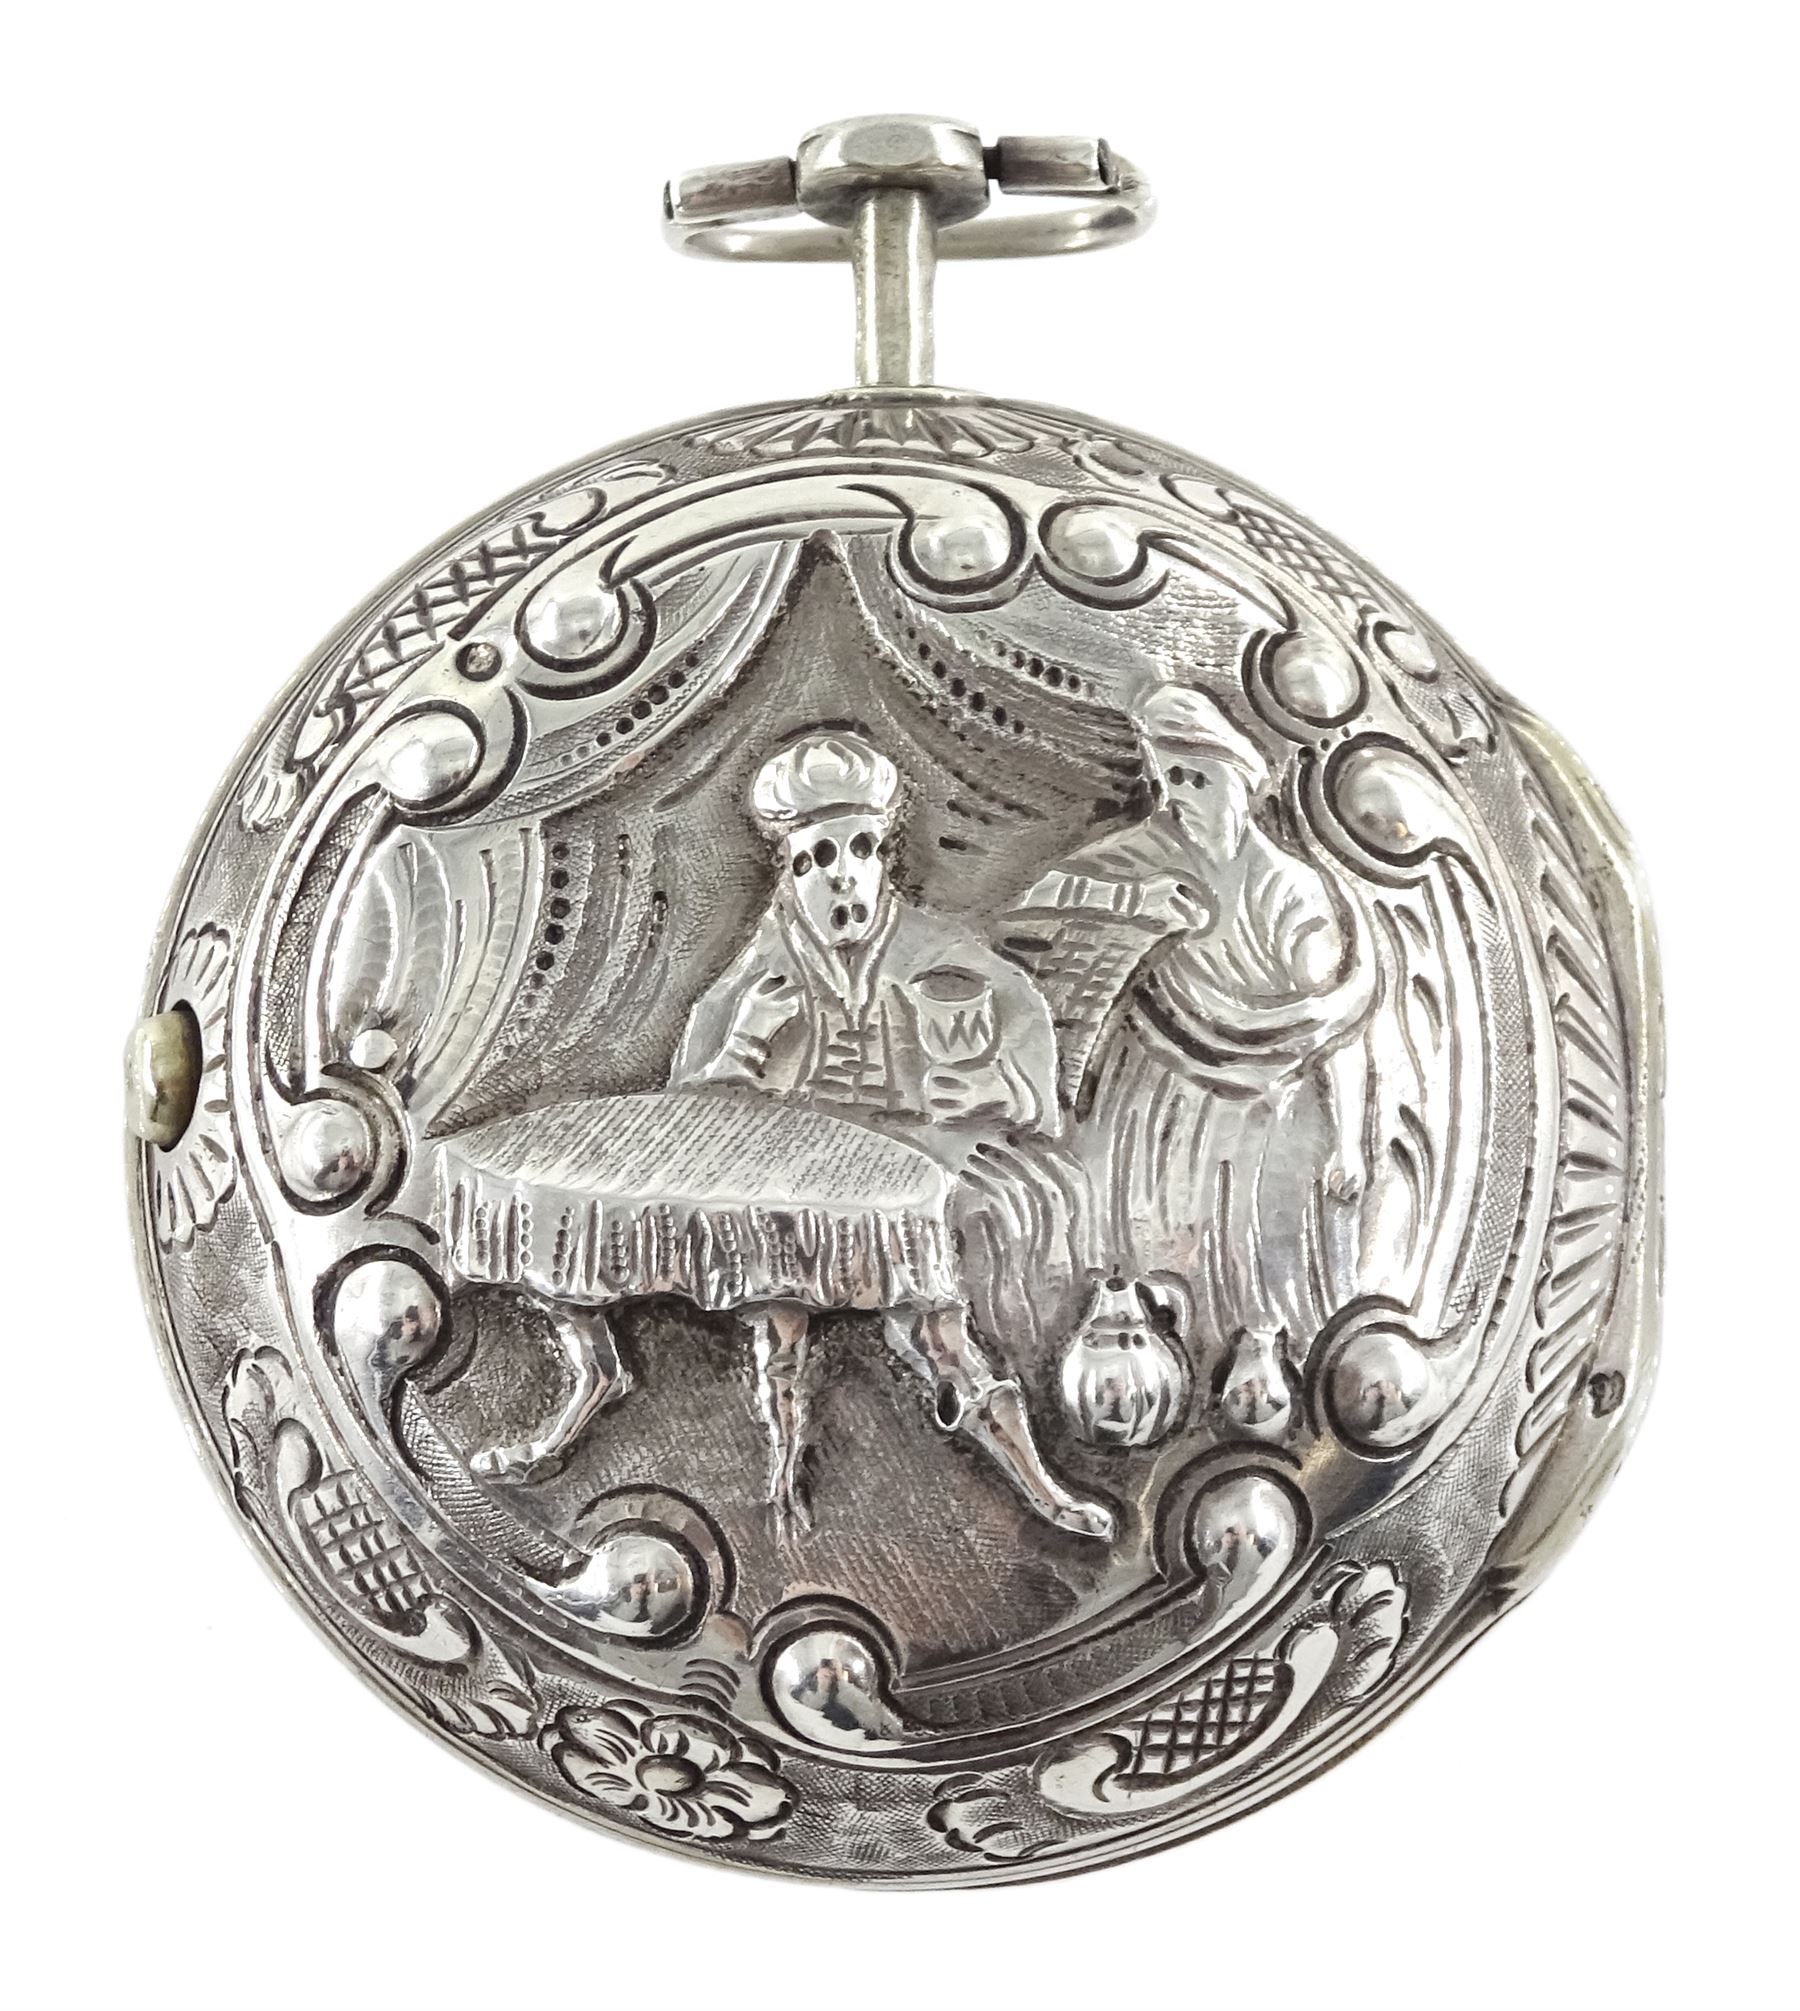 George III silver repousse pair cased verge fusee pocket watch by Samson, London, No. 20384, square - Image 2 of 8